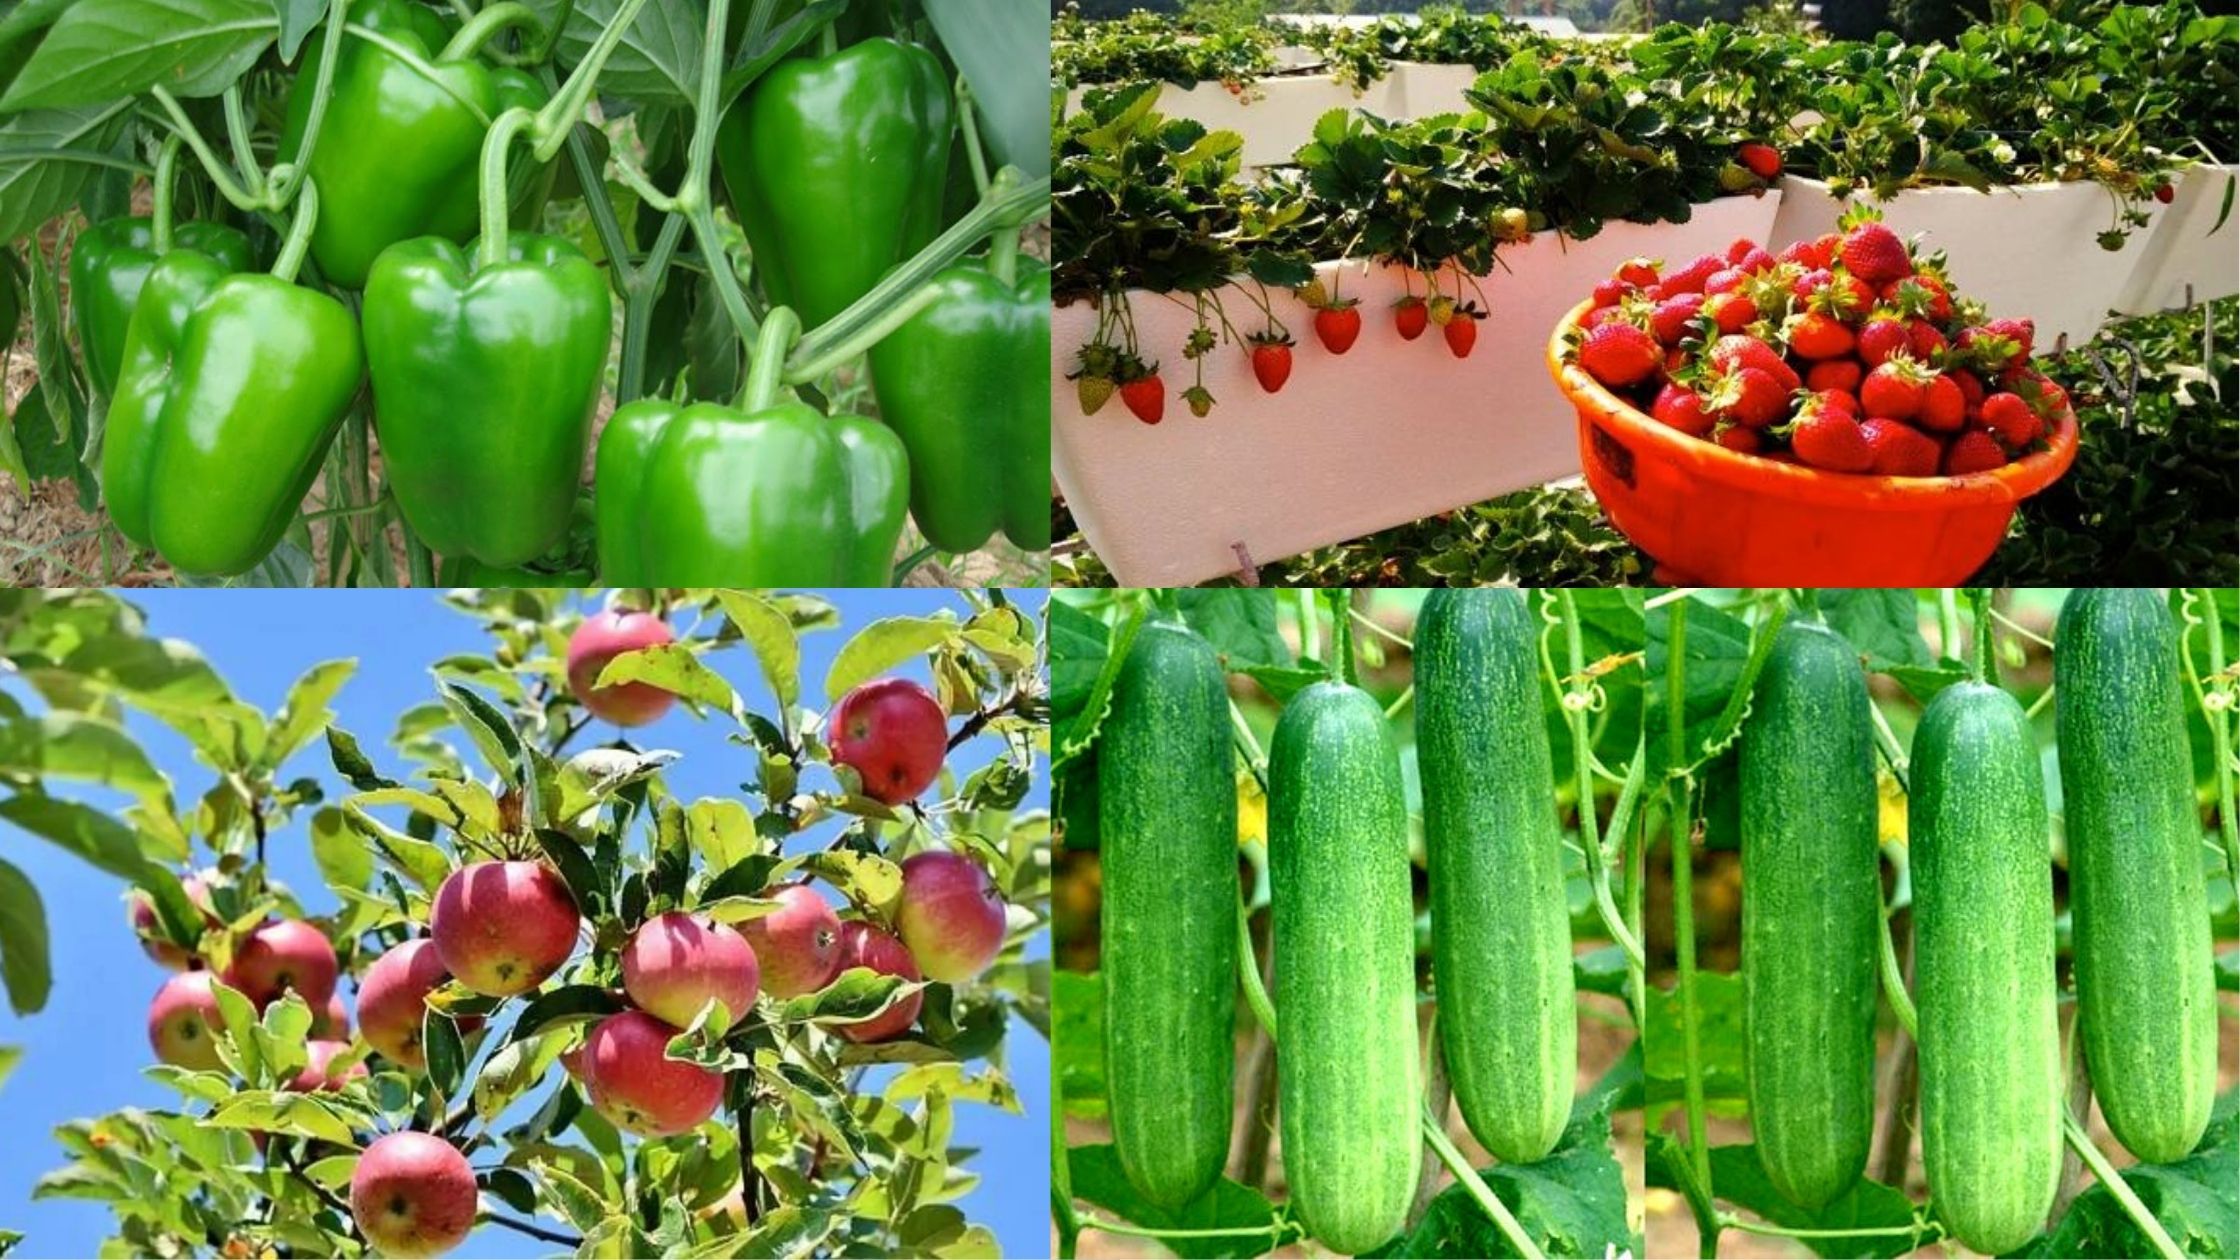 Capsicum Strawberry and Apple will be cultivated in Bihar